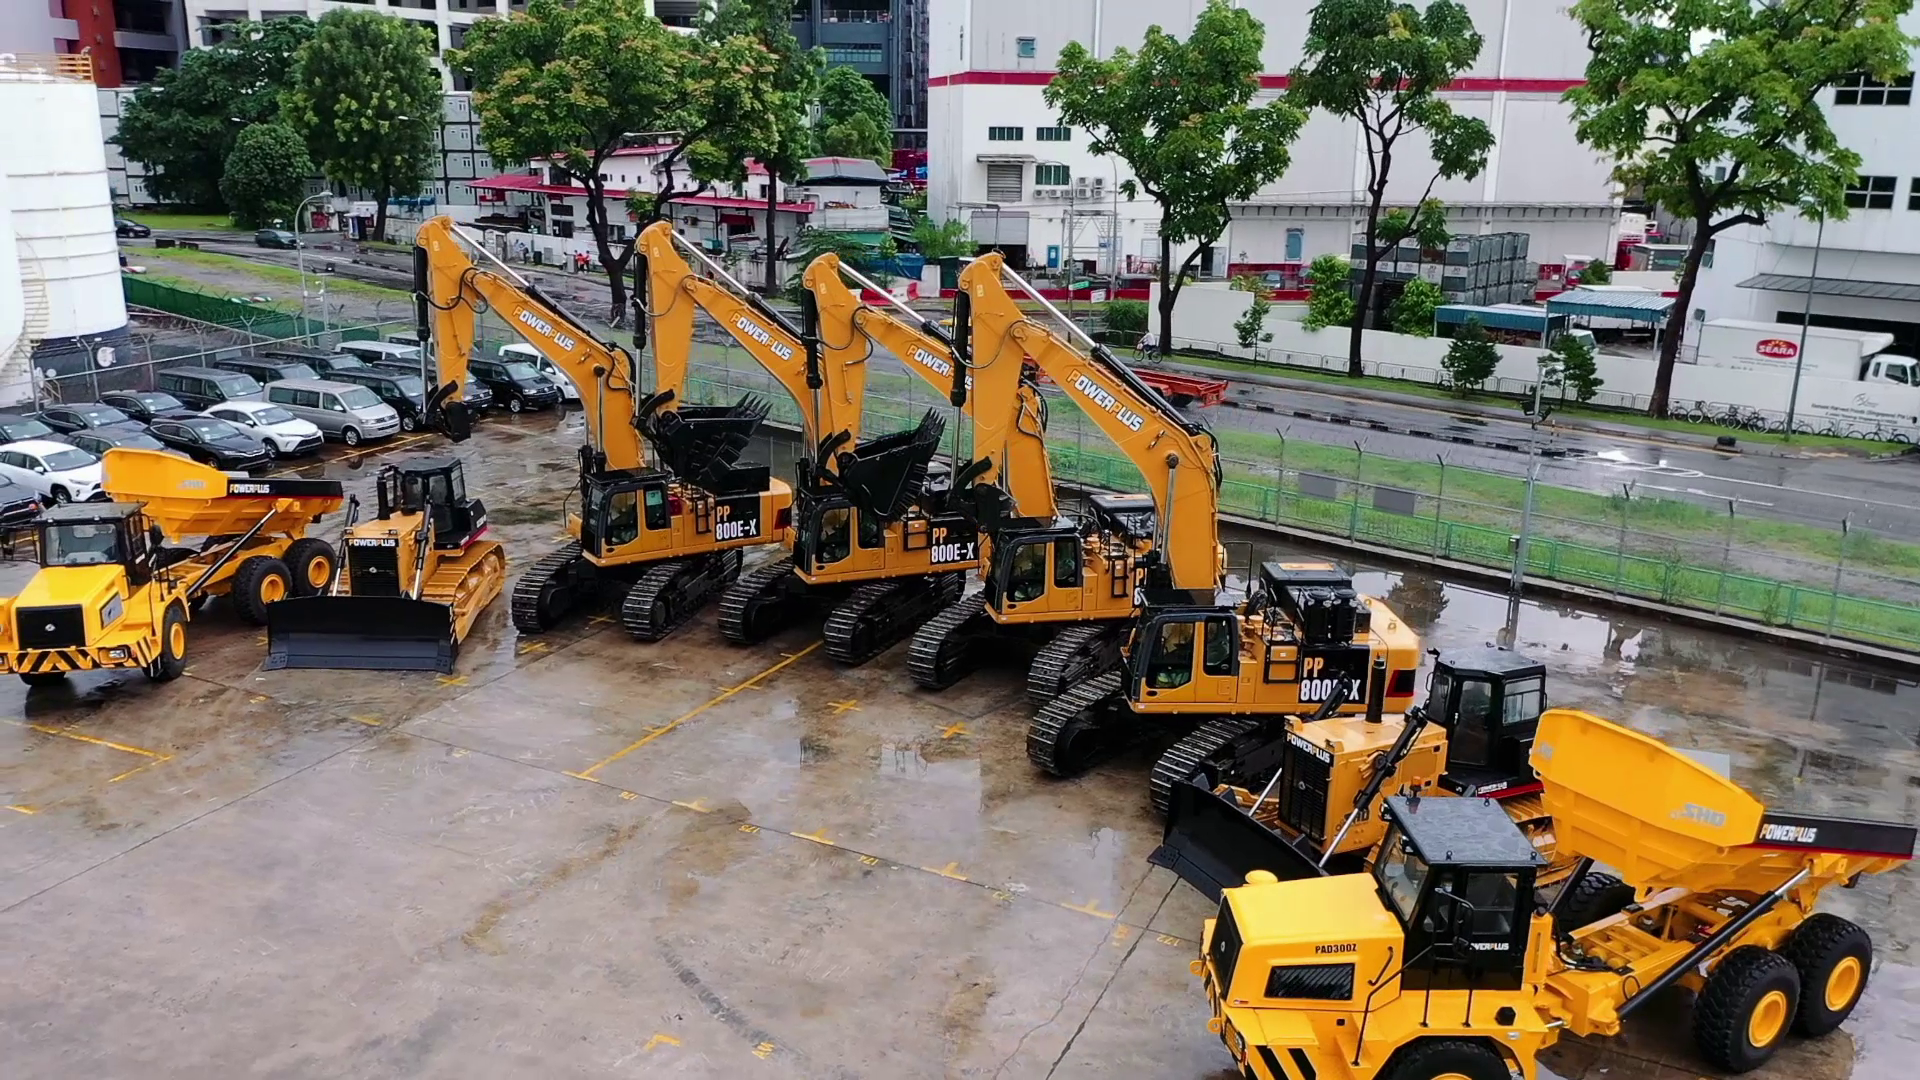 A fleet of Powerplus Excavators, Bulldozers & Articulated Dump Trucks which are used for general mining applications.